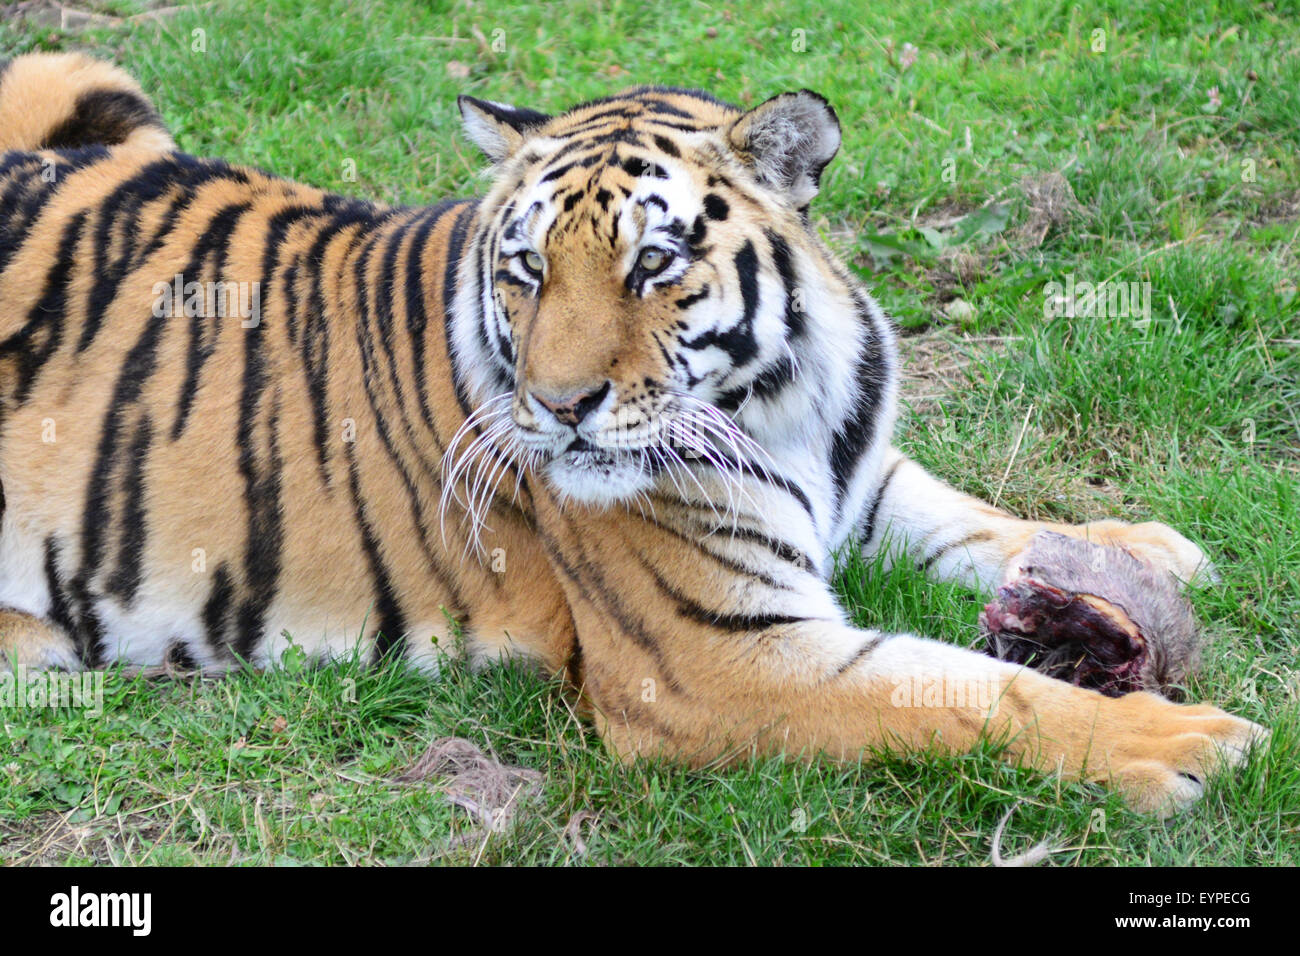 A tiger at Yorkshire Wildlife Park, Doncaster, South Yorkshire, UK. Picture: Scott Bairstow/Alamy Stock Photo